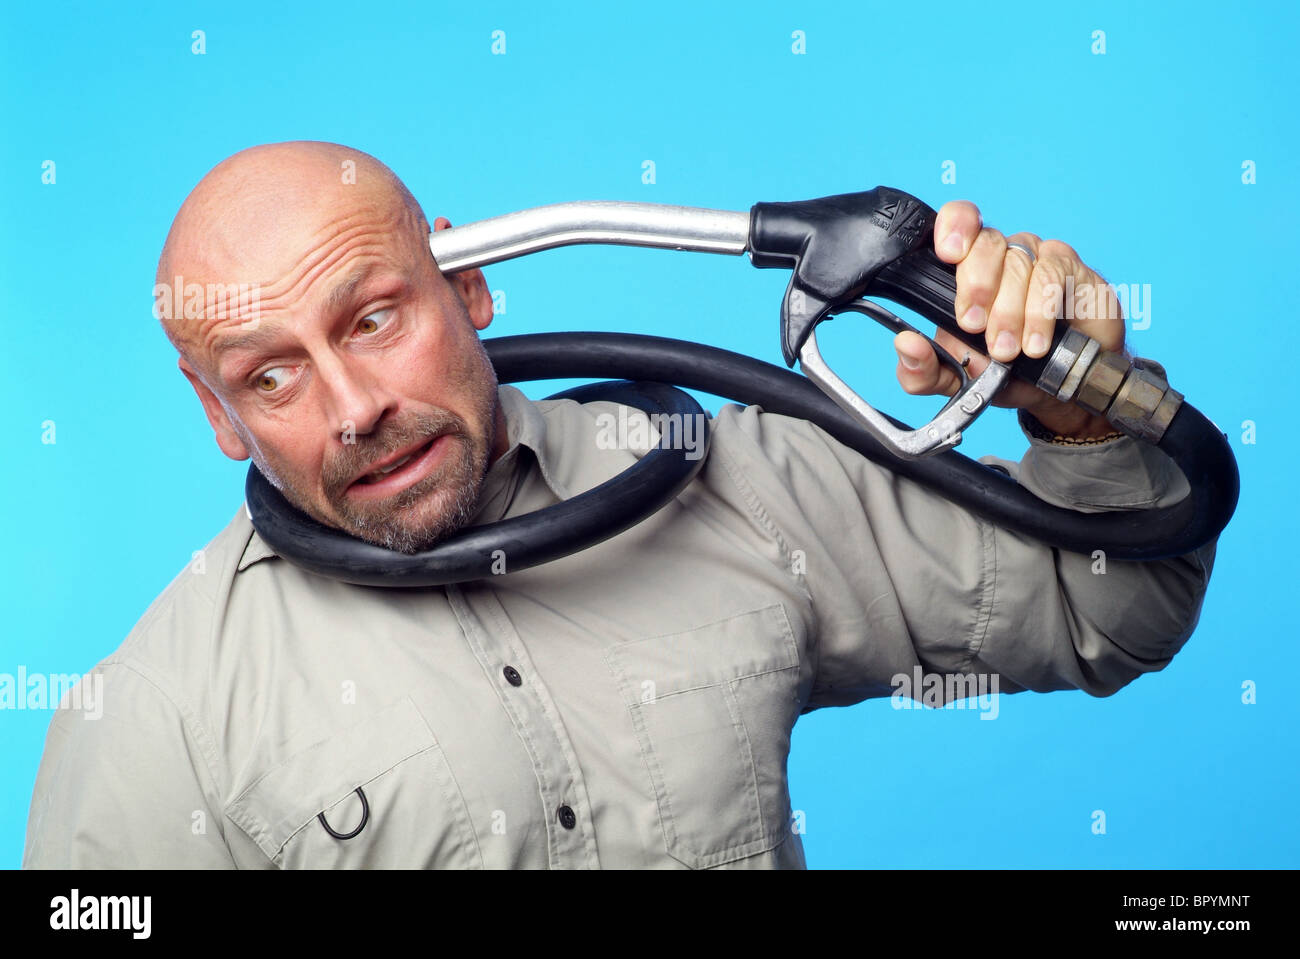 Man holding a petrol nozzle against his head Stock Photo